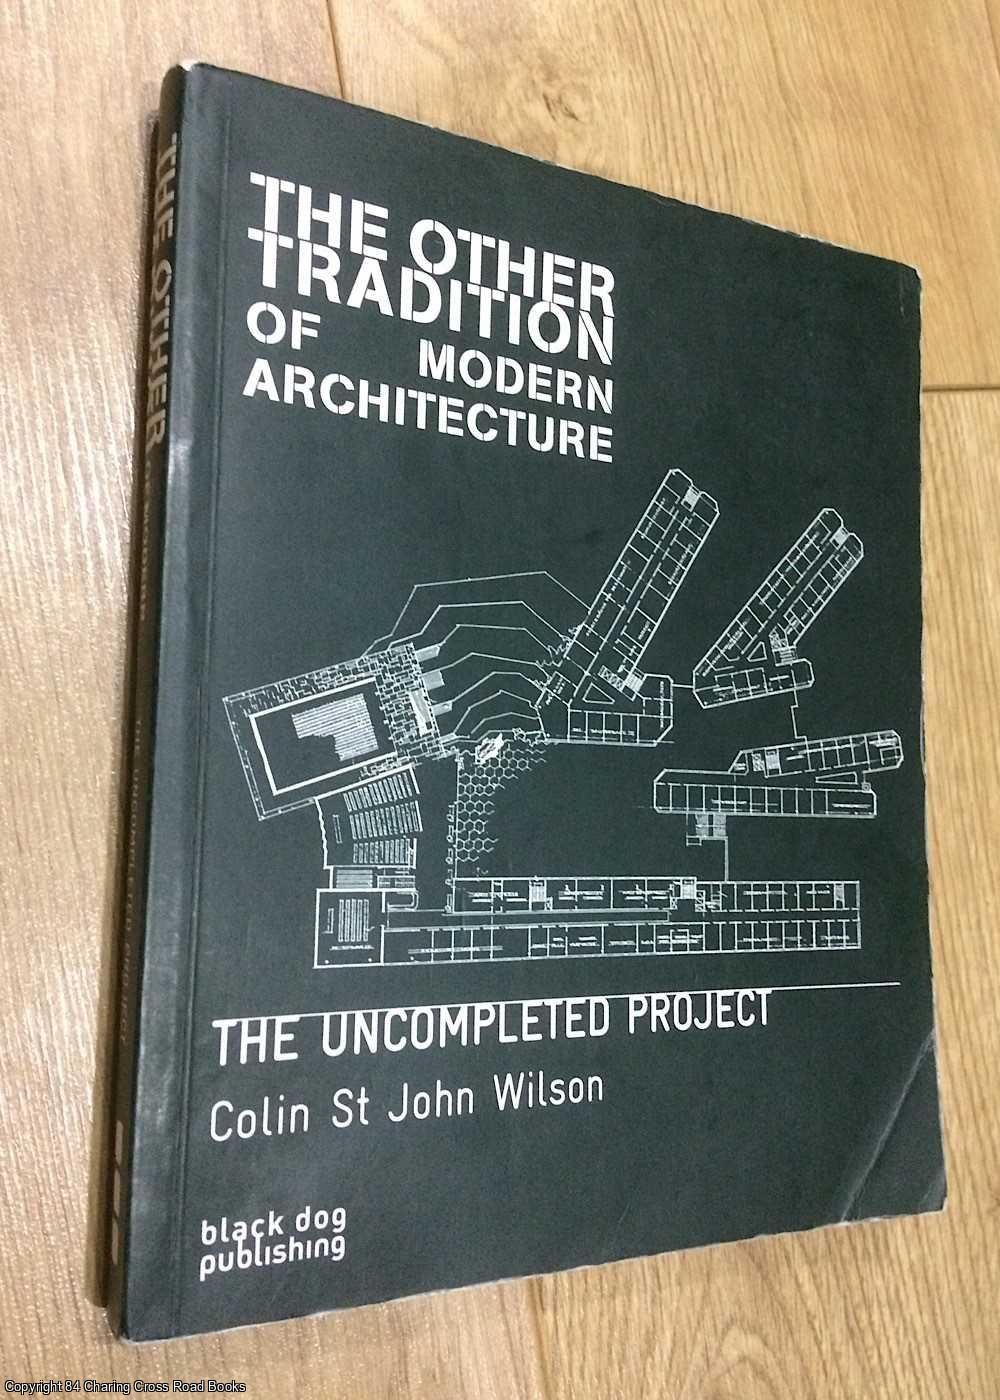 Colin St John Wilson - The Other Tradition of Modern Architecture: The Uncompleted Project